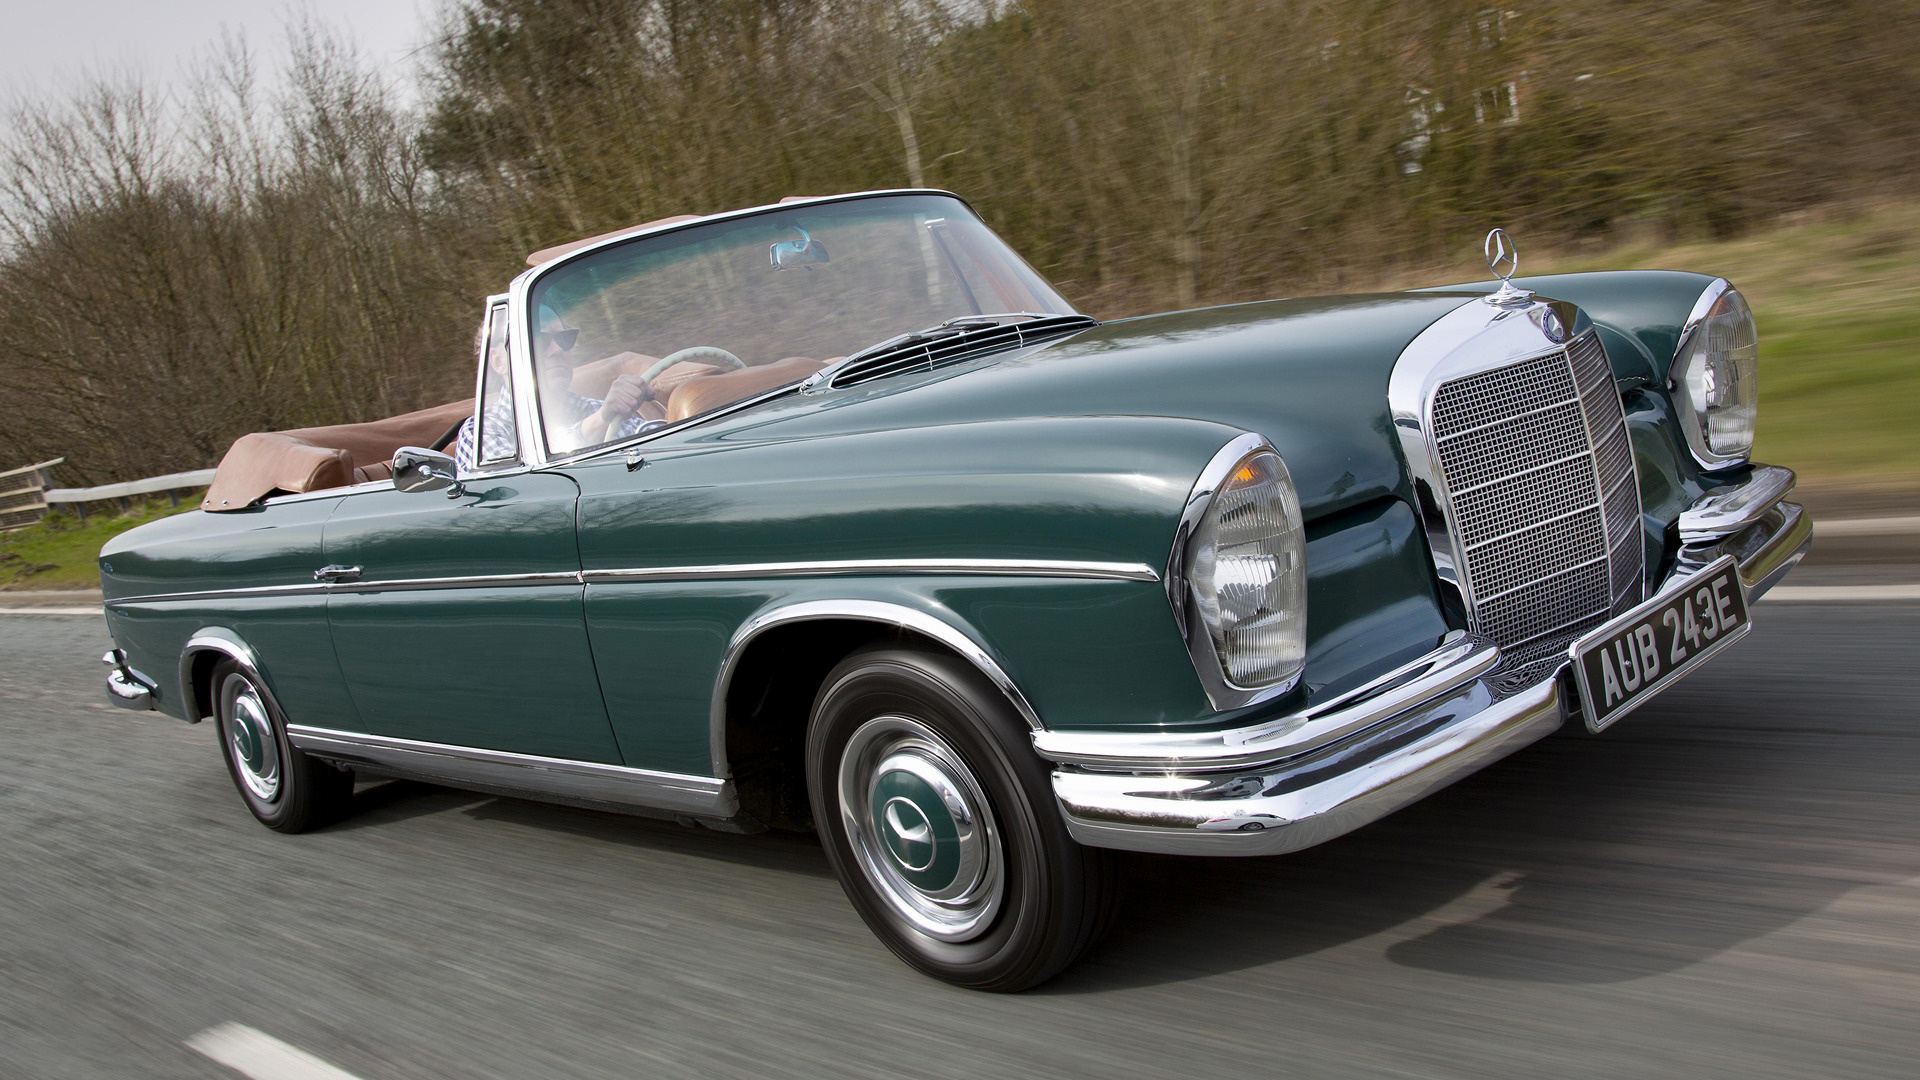 1962 Mercedes-Benz 300 SE Cabriolet (UK) - Wallpapers and HD Images